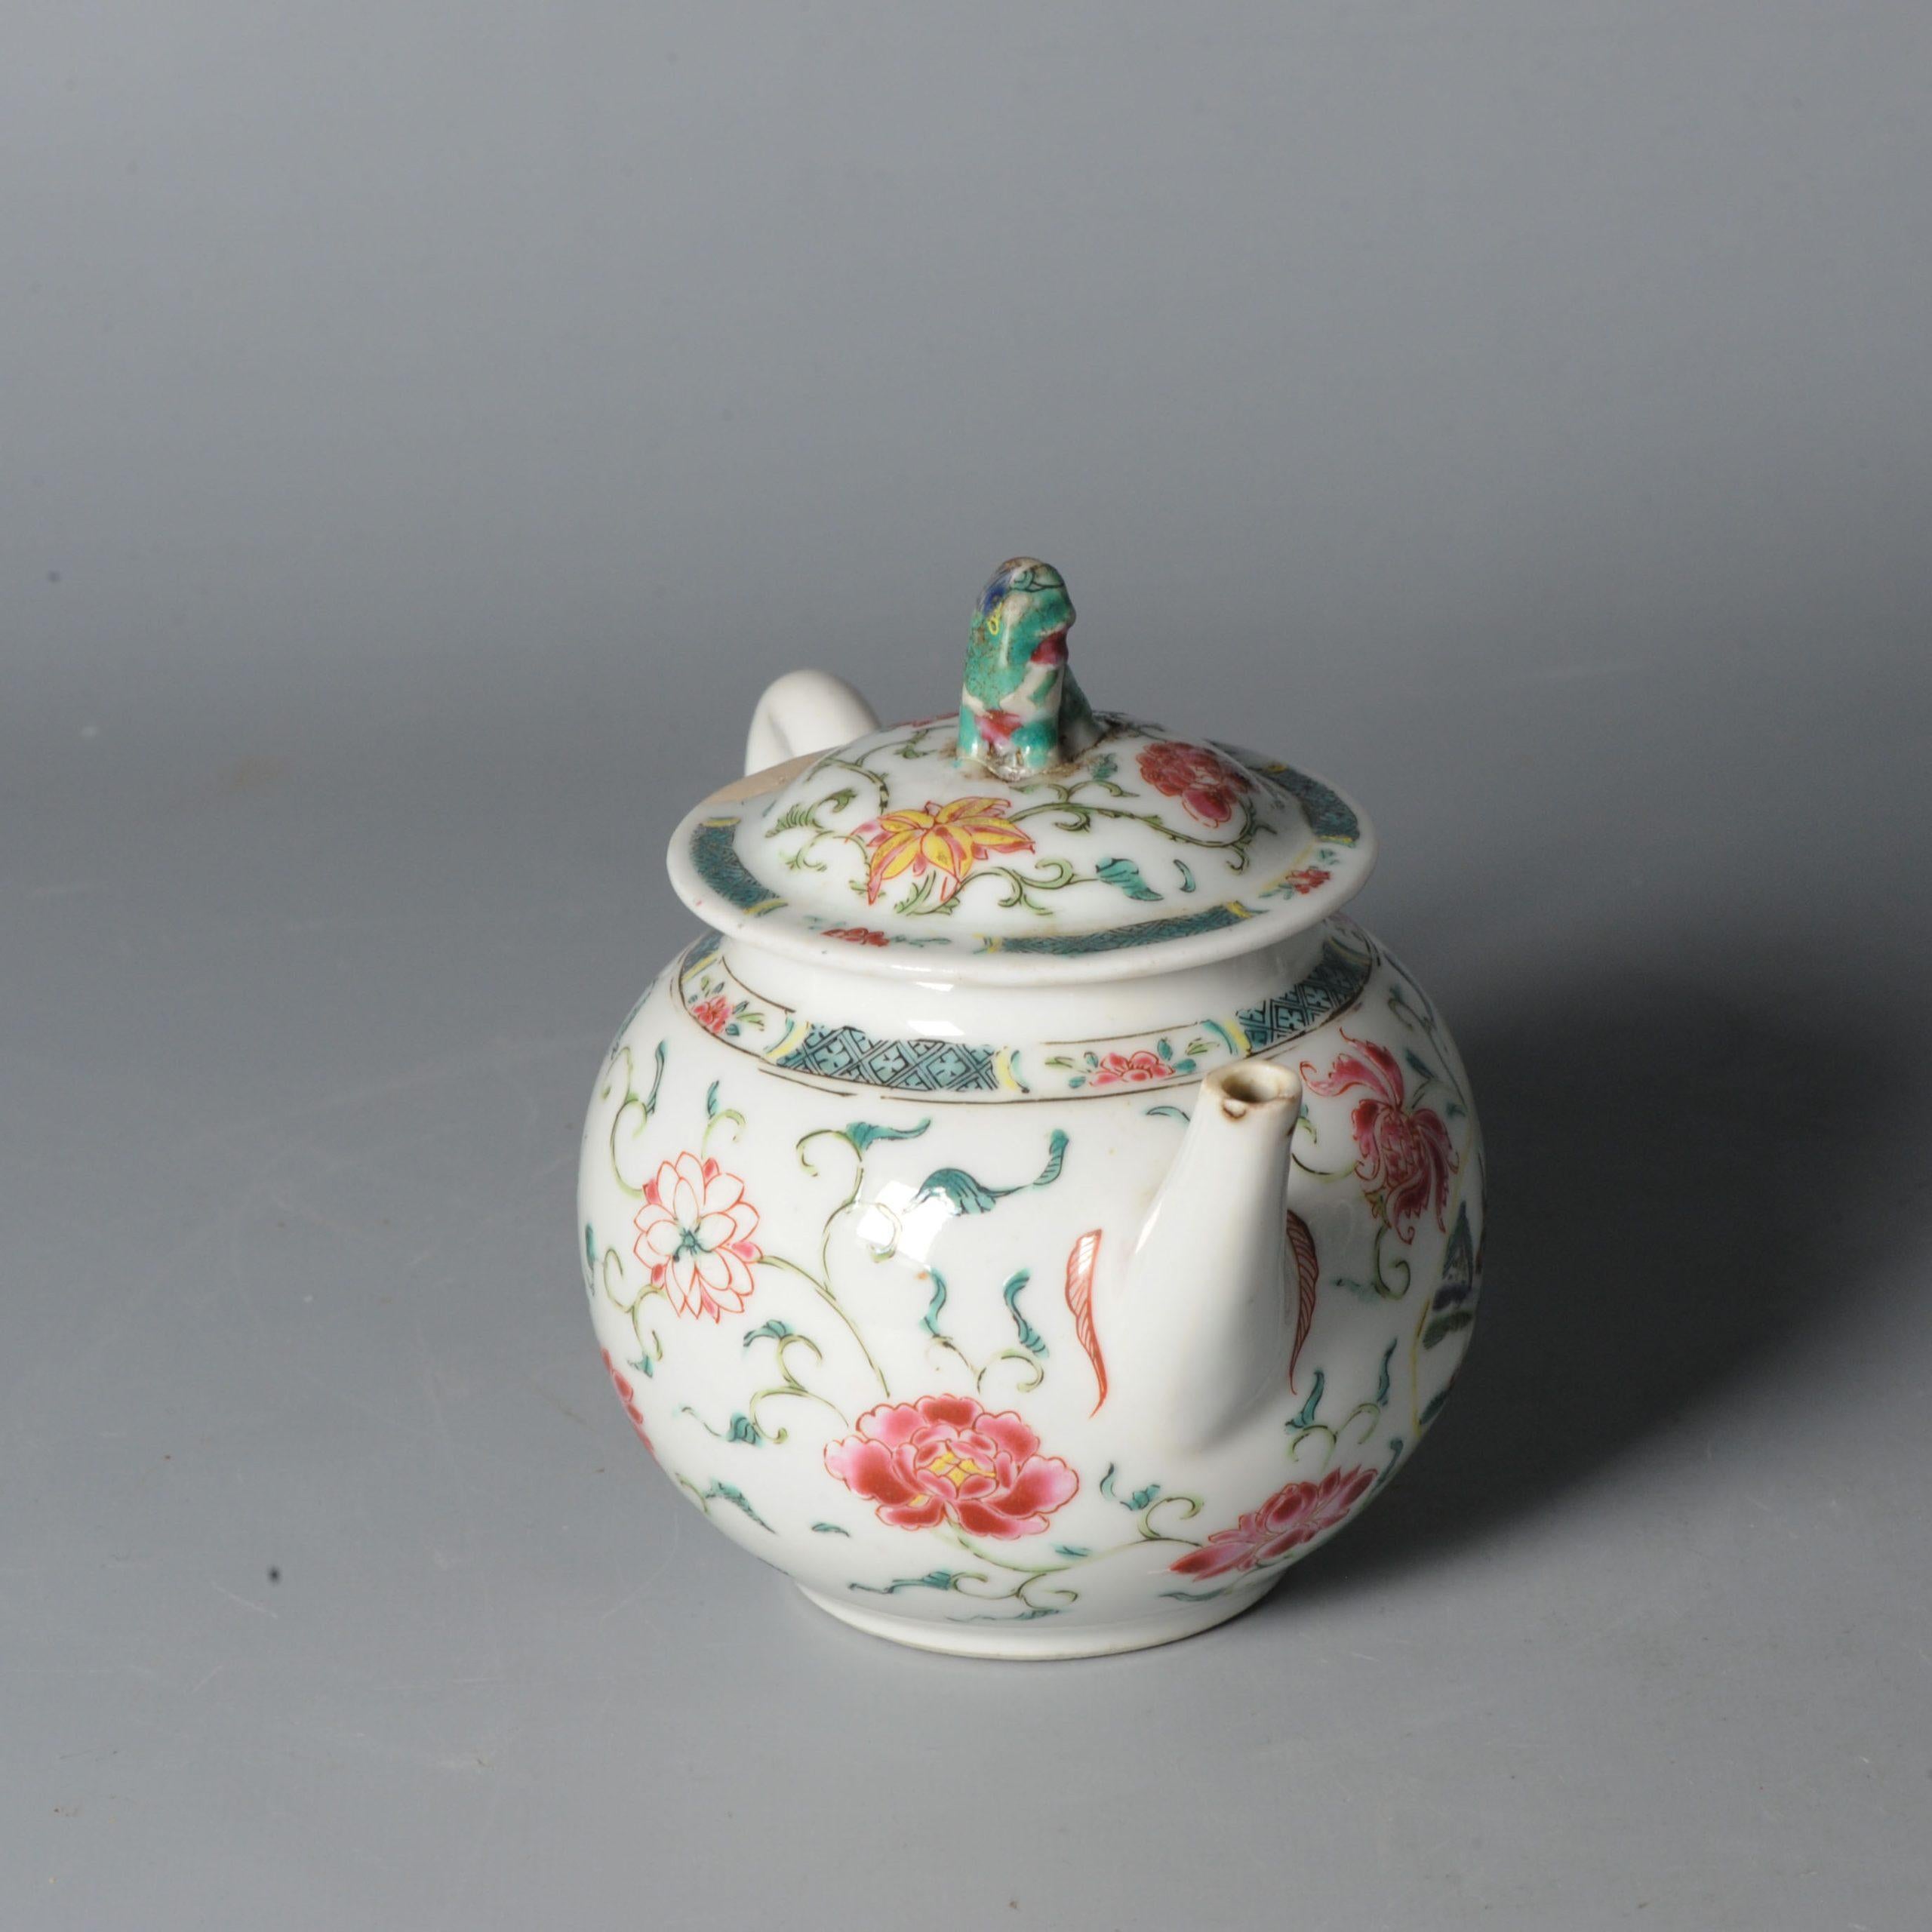 A very nice example with Donkey and Traveller with attendant.

Additional information:
Material: Porcelain & Pottery
Region of Origin: China
Emperor: Qianlong (1735-1796)
Period: 18th century Qing (1661 - 1912)
Age: Pre-1800
Original/Reproduction: